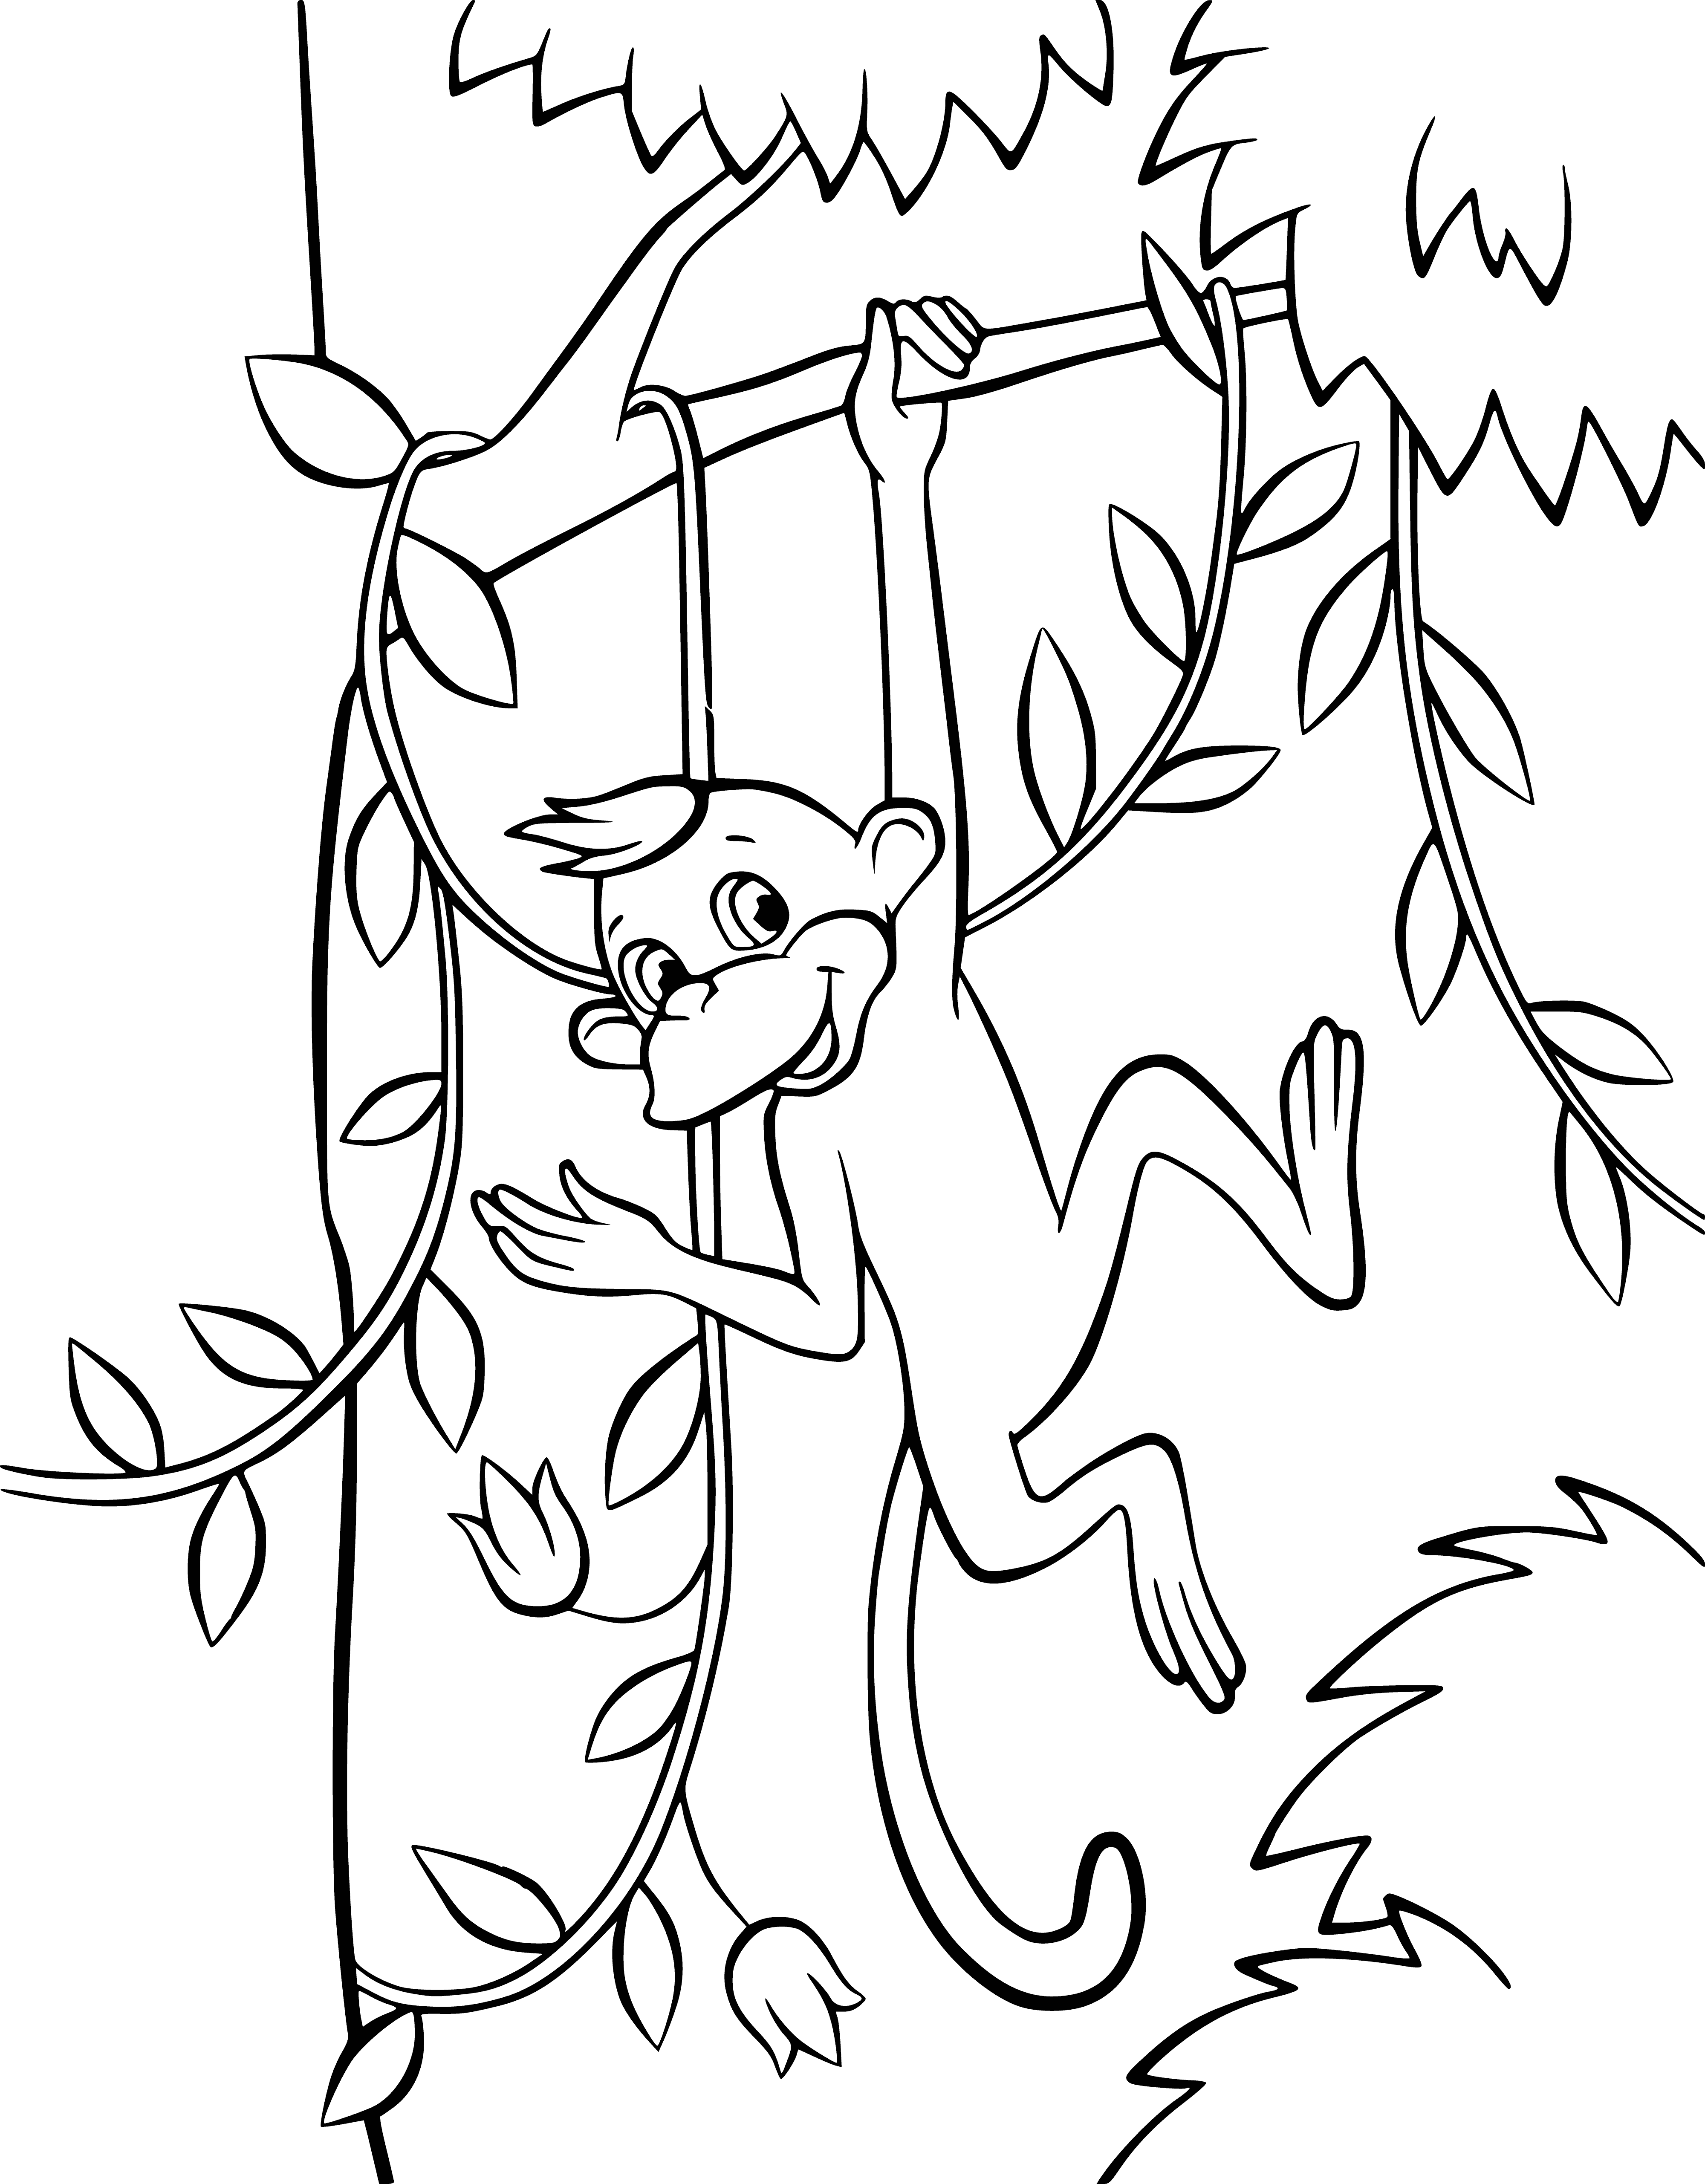 coloring page: Small monkey sits on branch, brown/white fur, long tail, big nose.